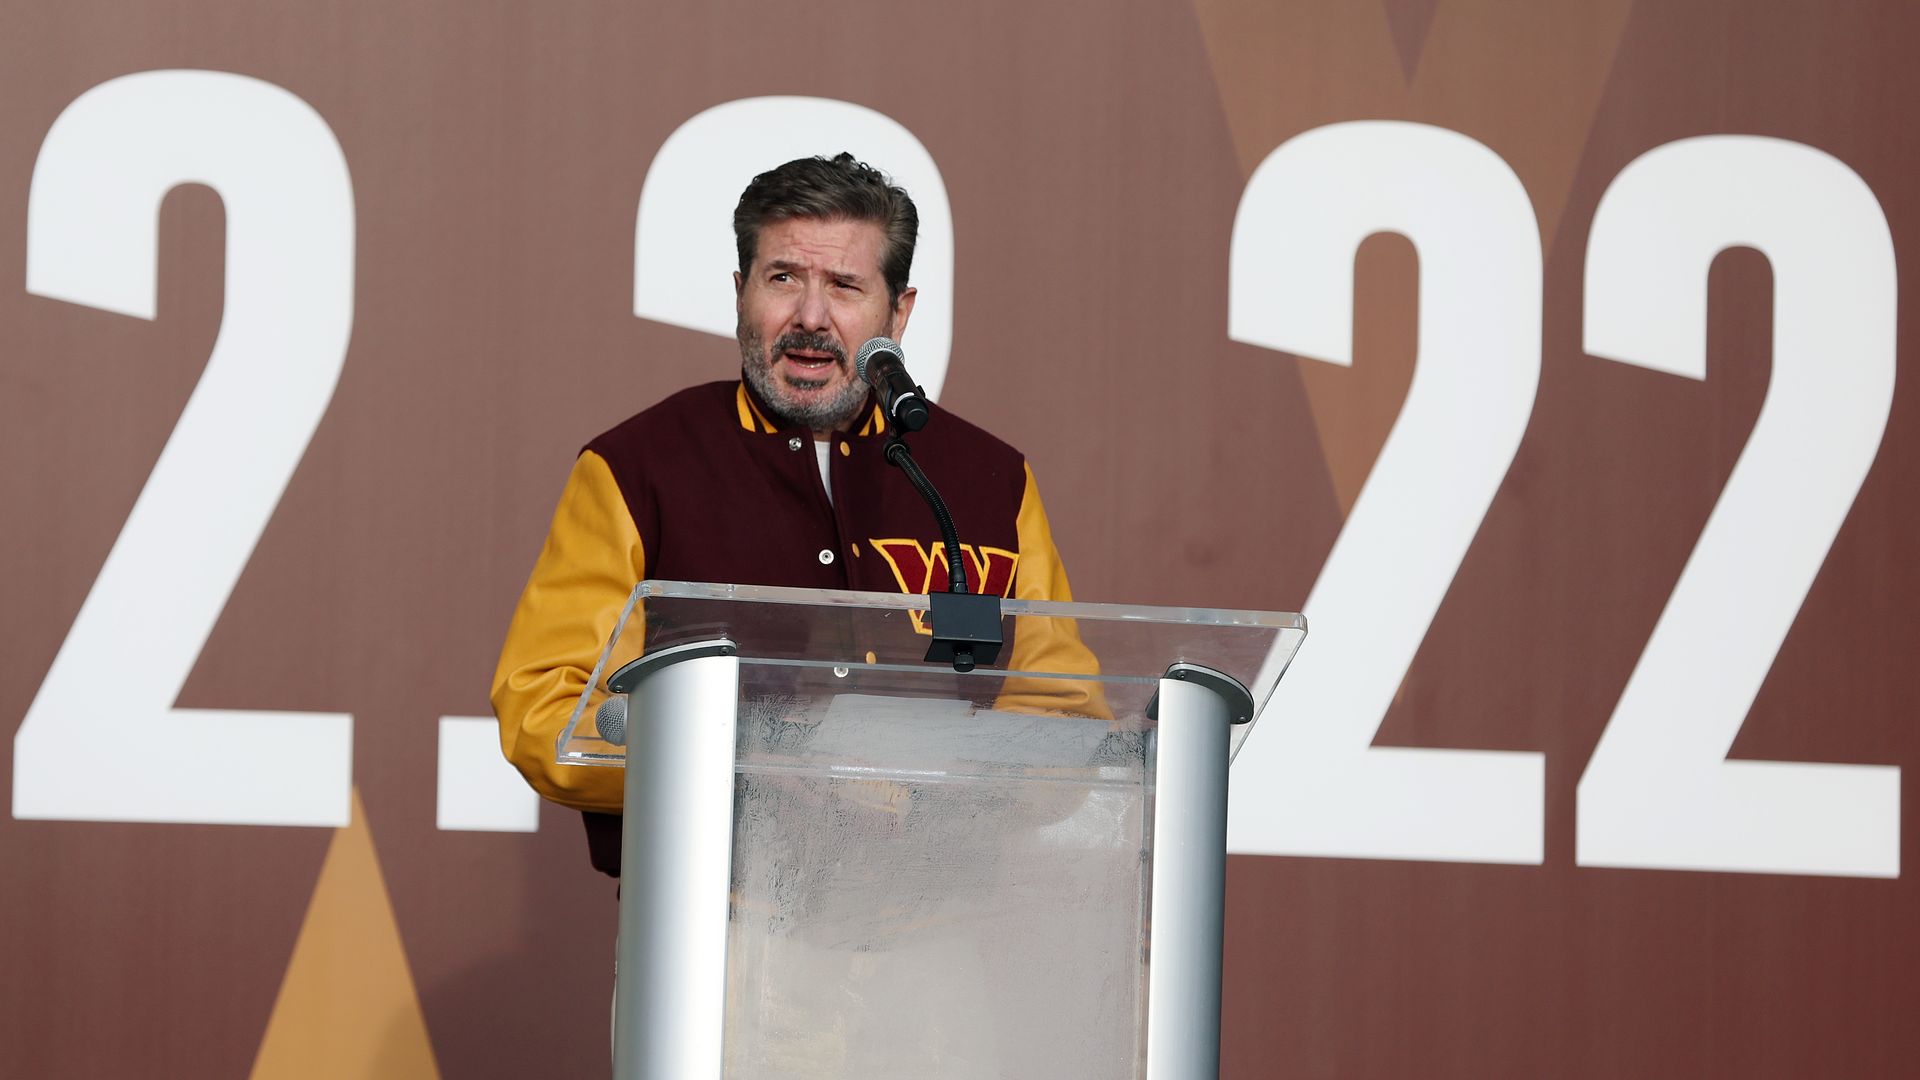 eam co-owner Dan Snyder speaks during the announcement of the Washington Football Team's name change to the Washington Commanders at FedExField on February 02, 2022 in Landover, Maryland. 